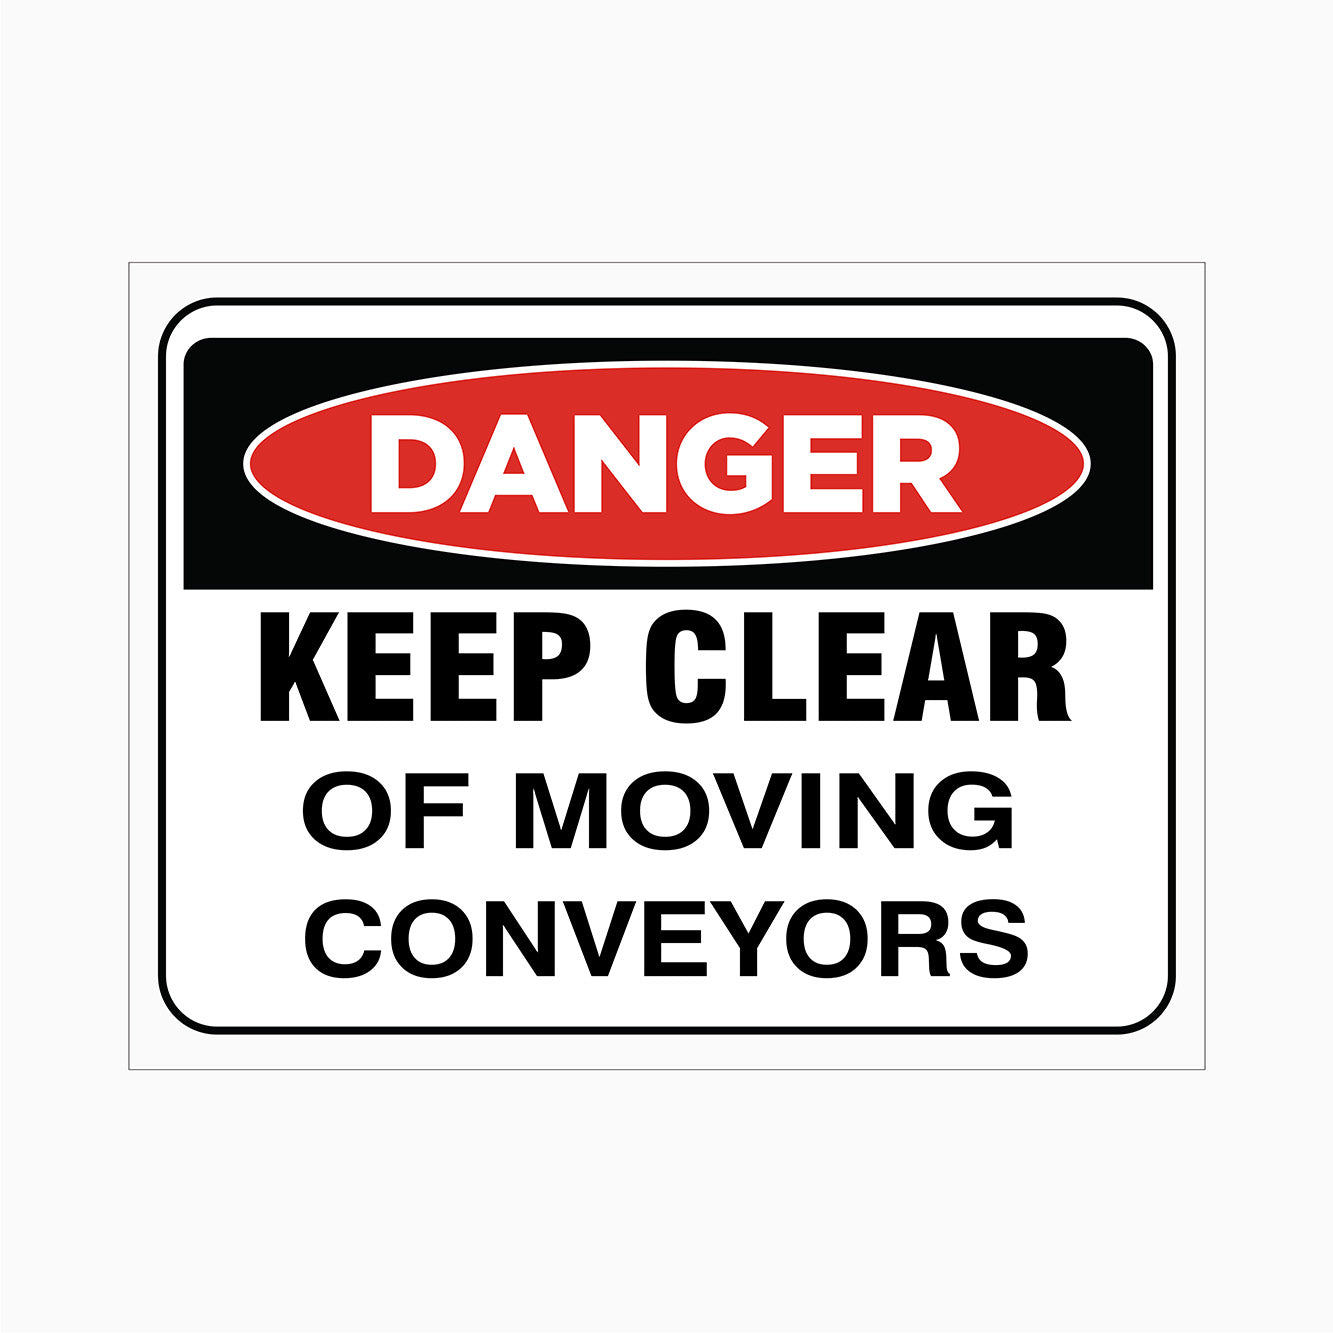 KEEP CLEAR OF MOVING CONVEYORS SIGN